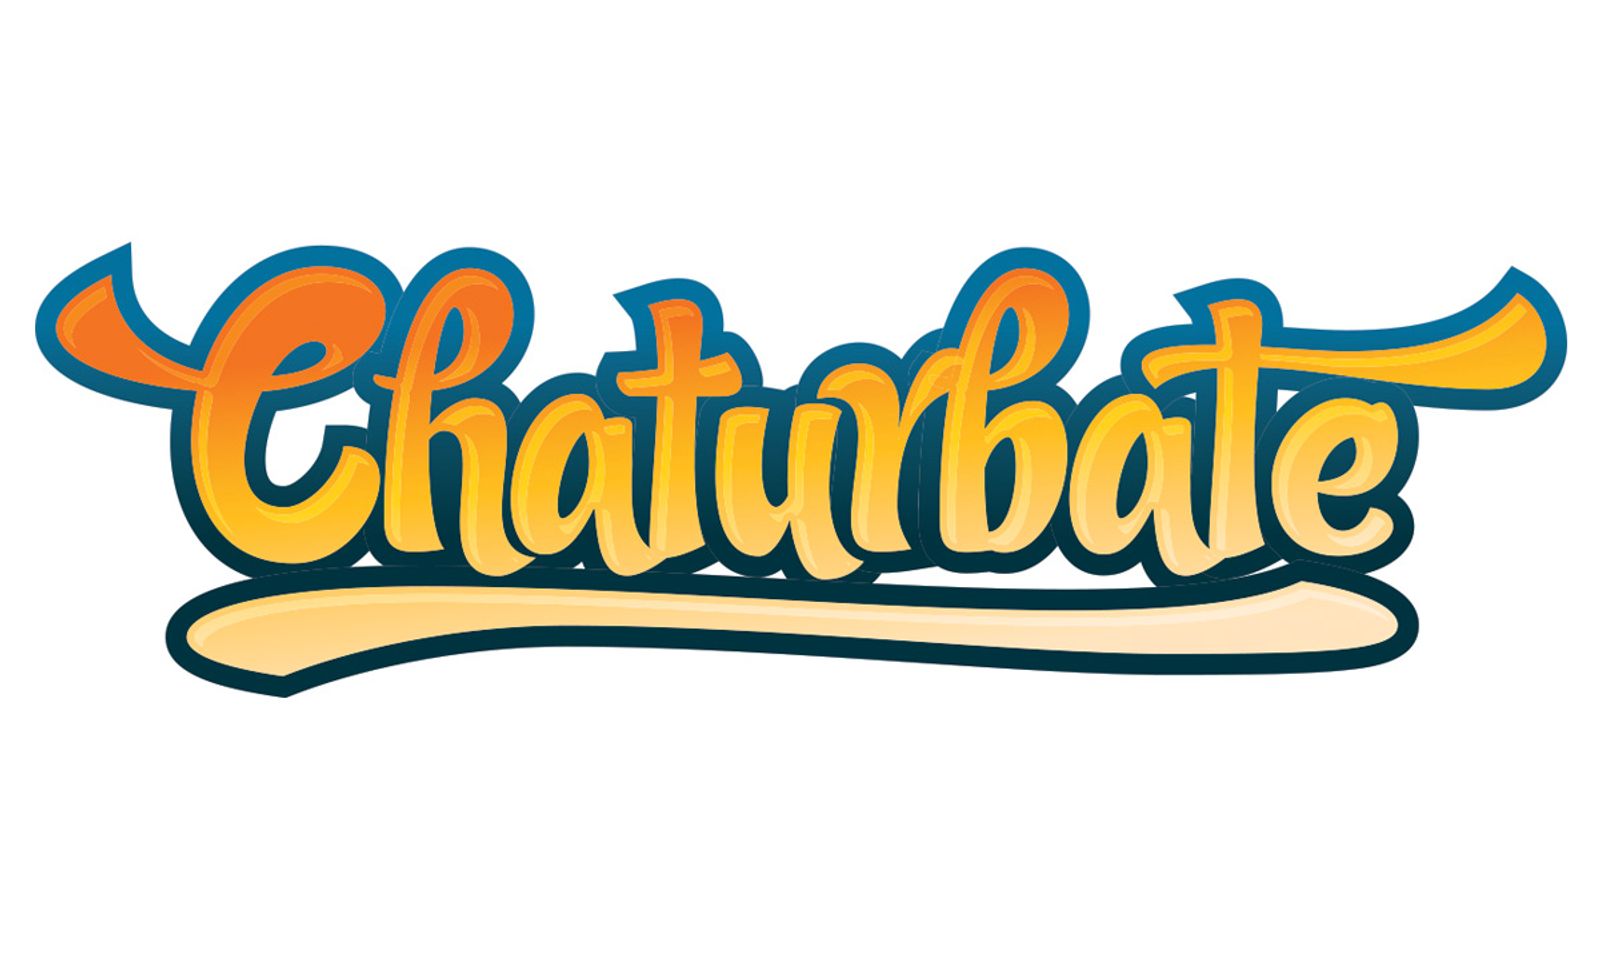 Chaturbate Features Kendra Lust on a Special Feature Cam Show